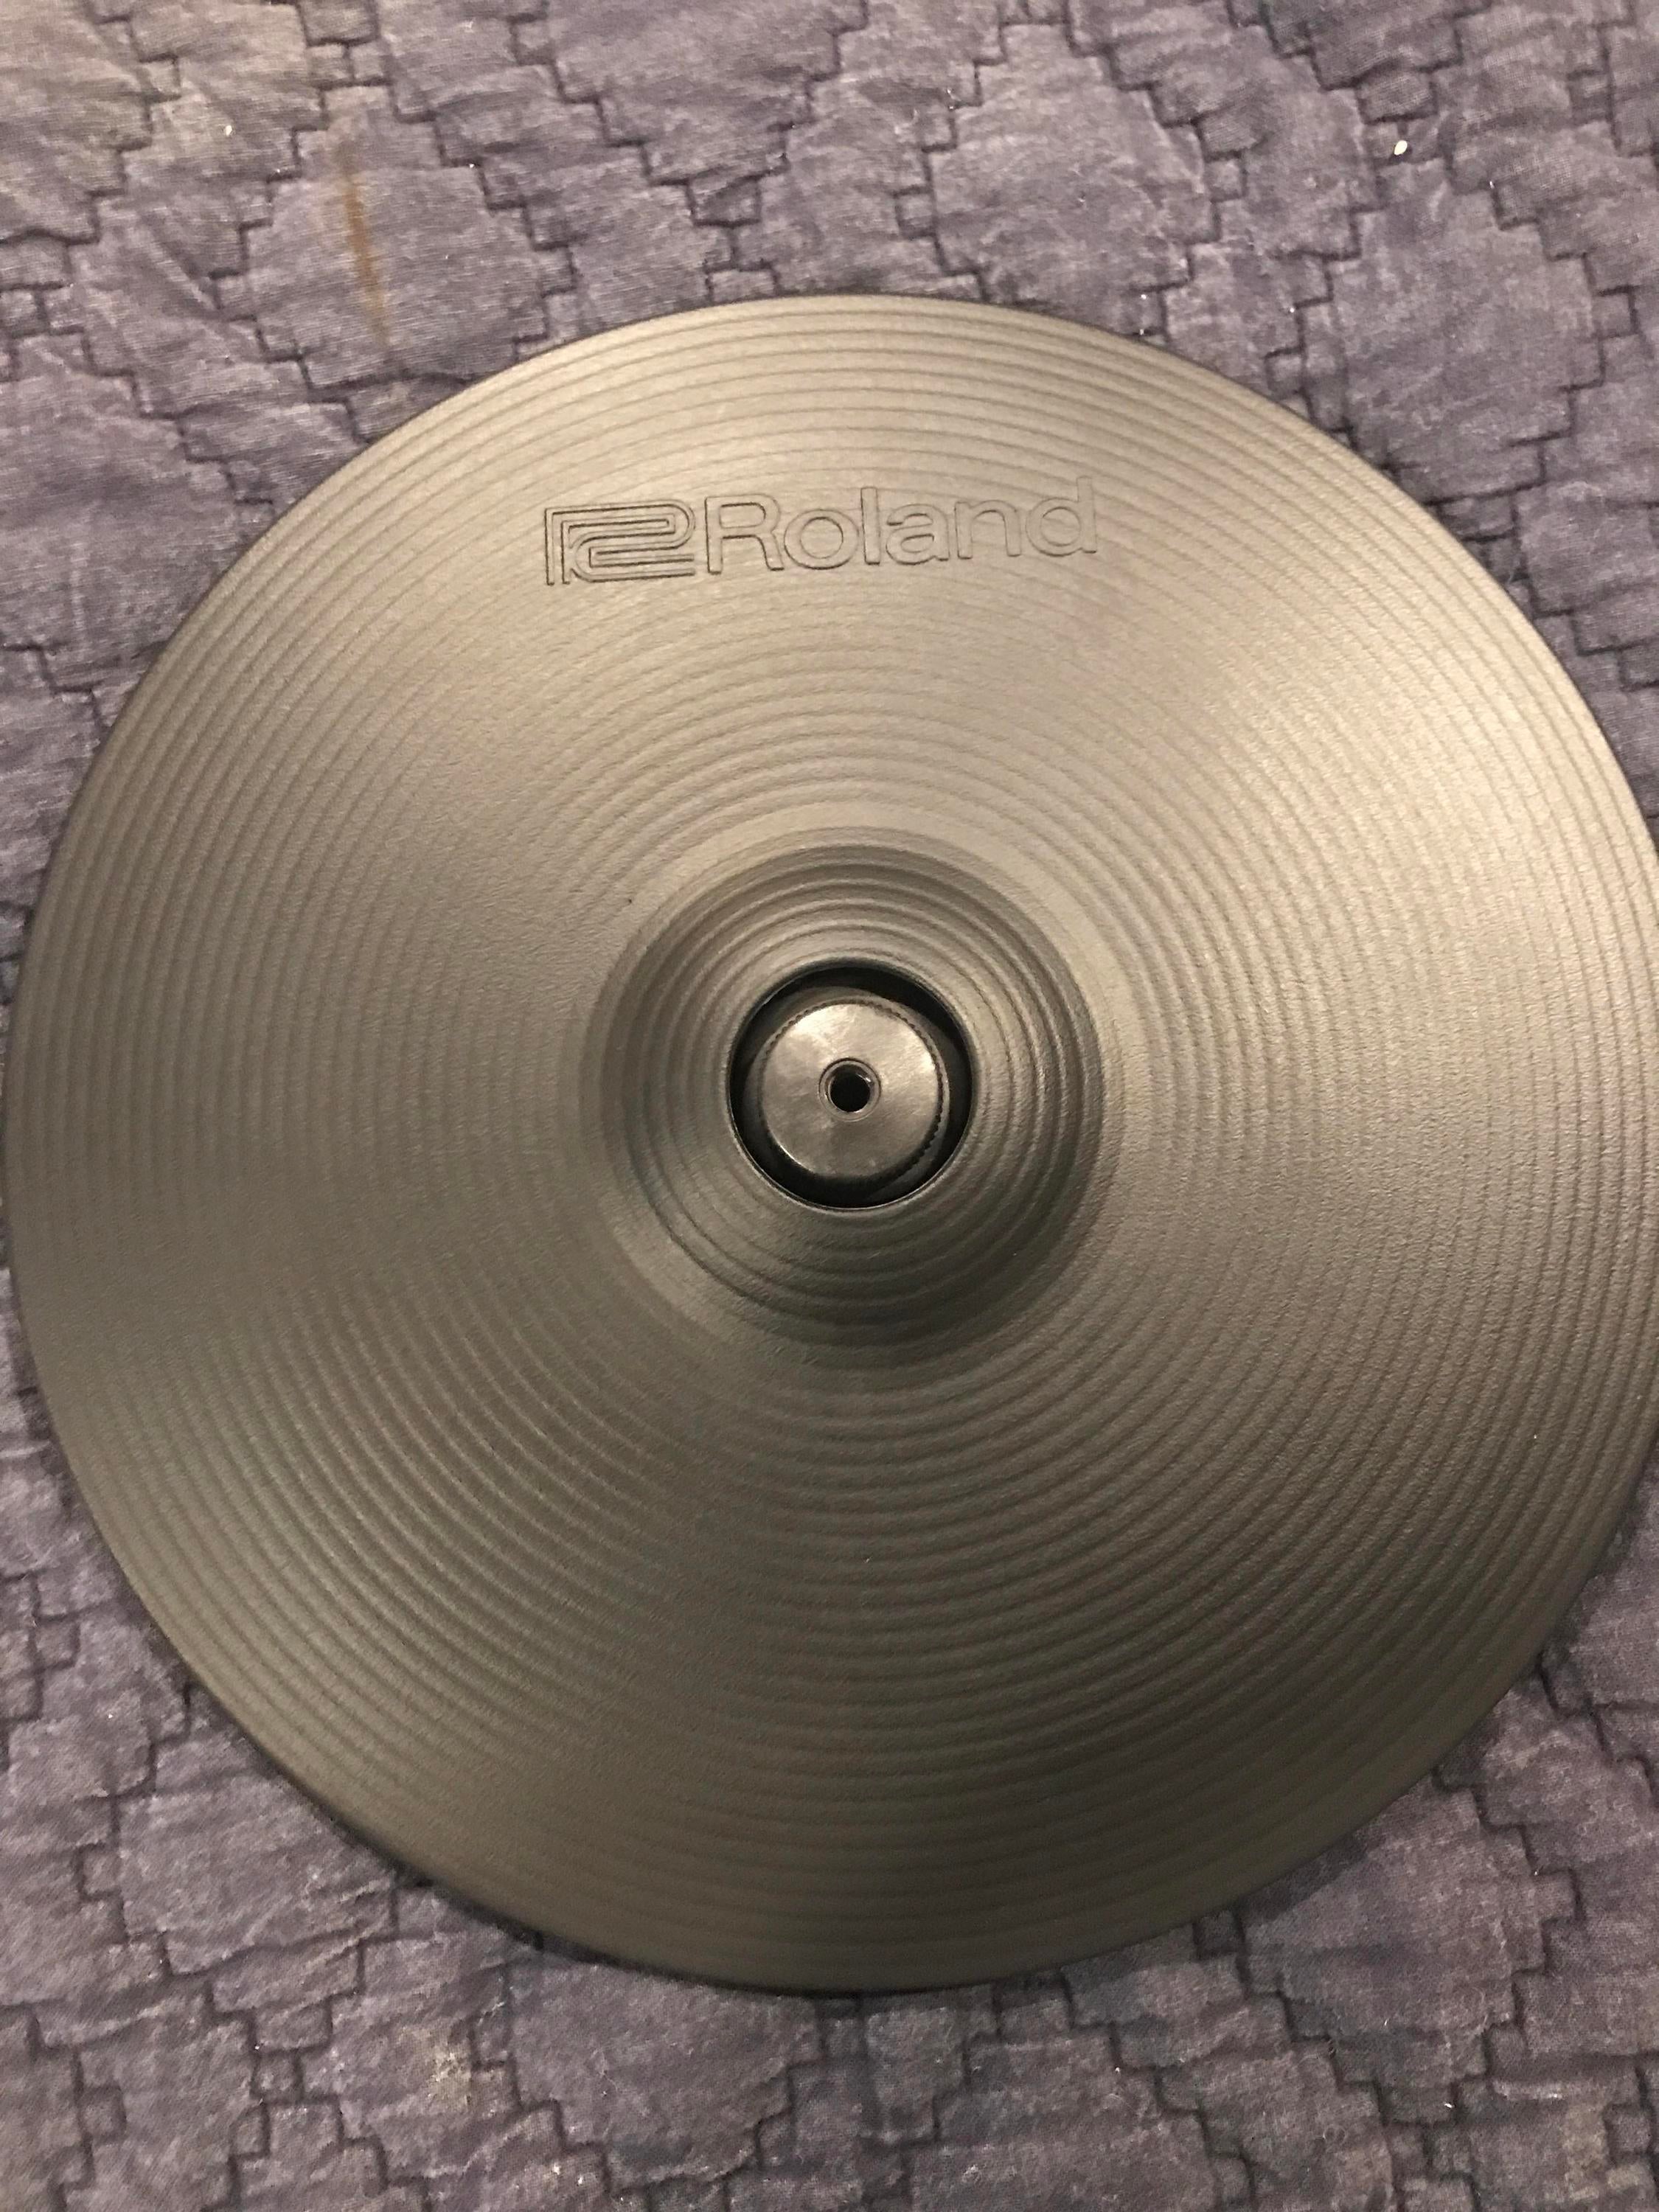 Used Roland CY-12C Electric Drum Crash - Sweetwater's Gear Exchange